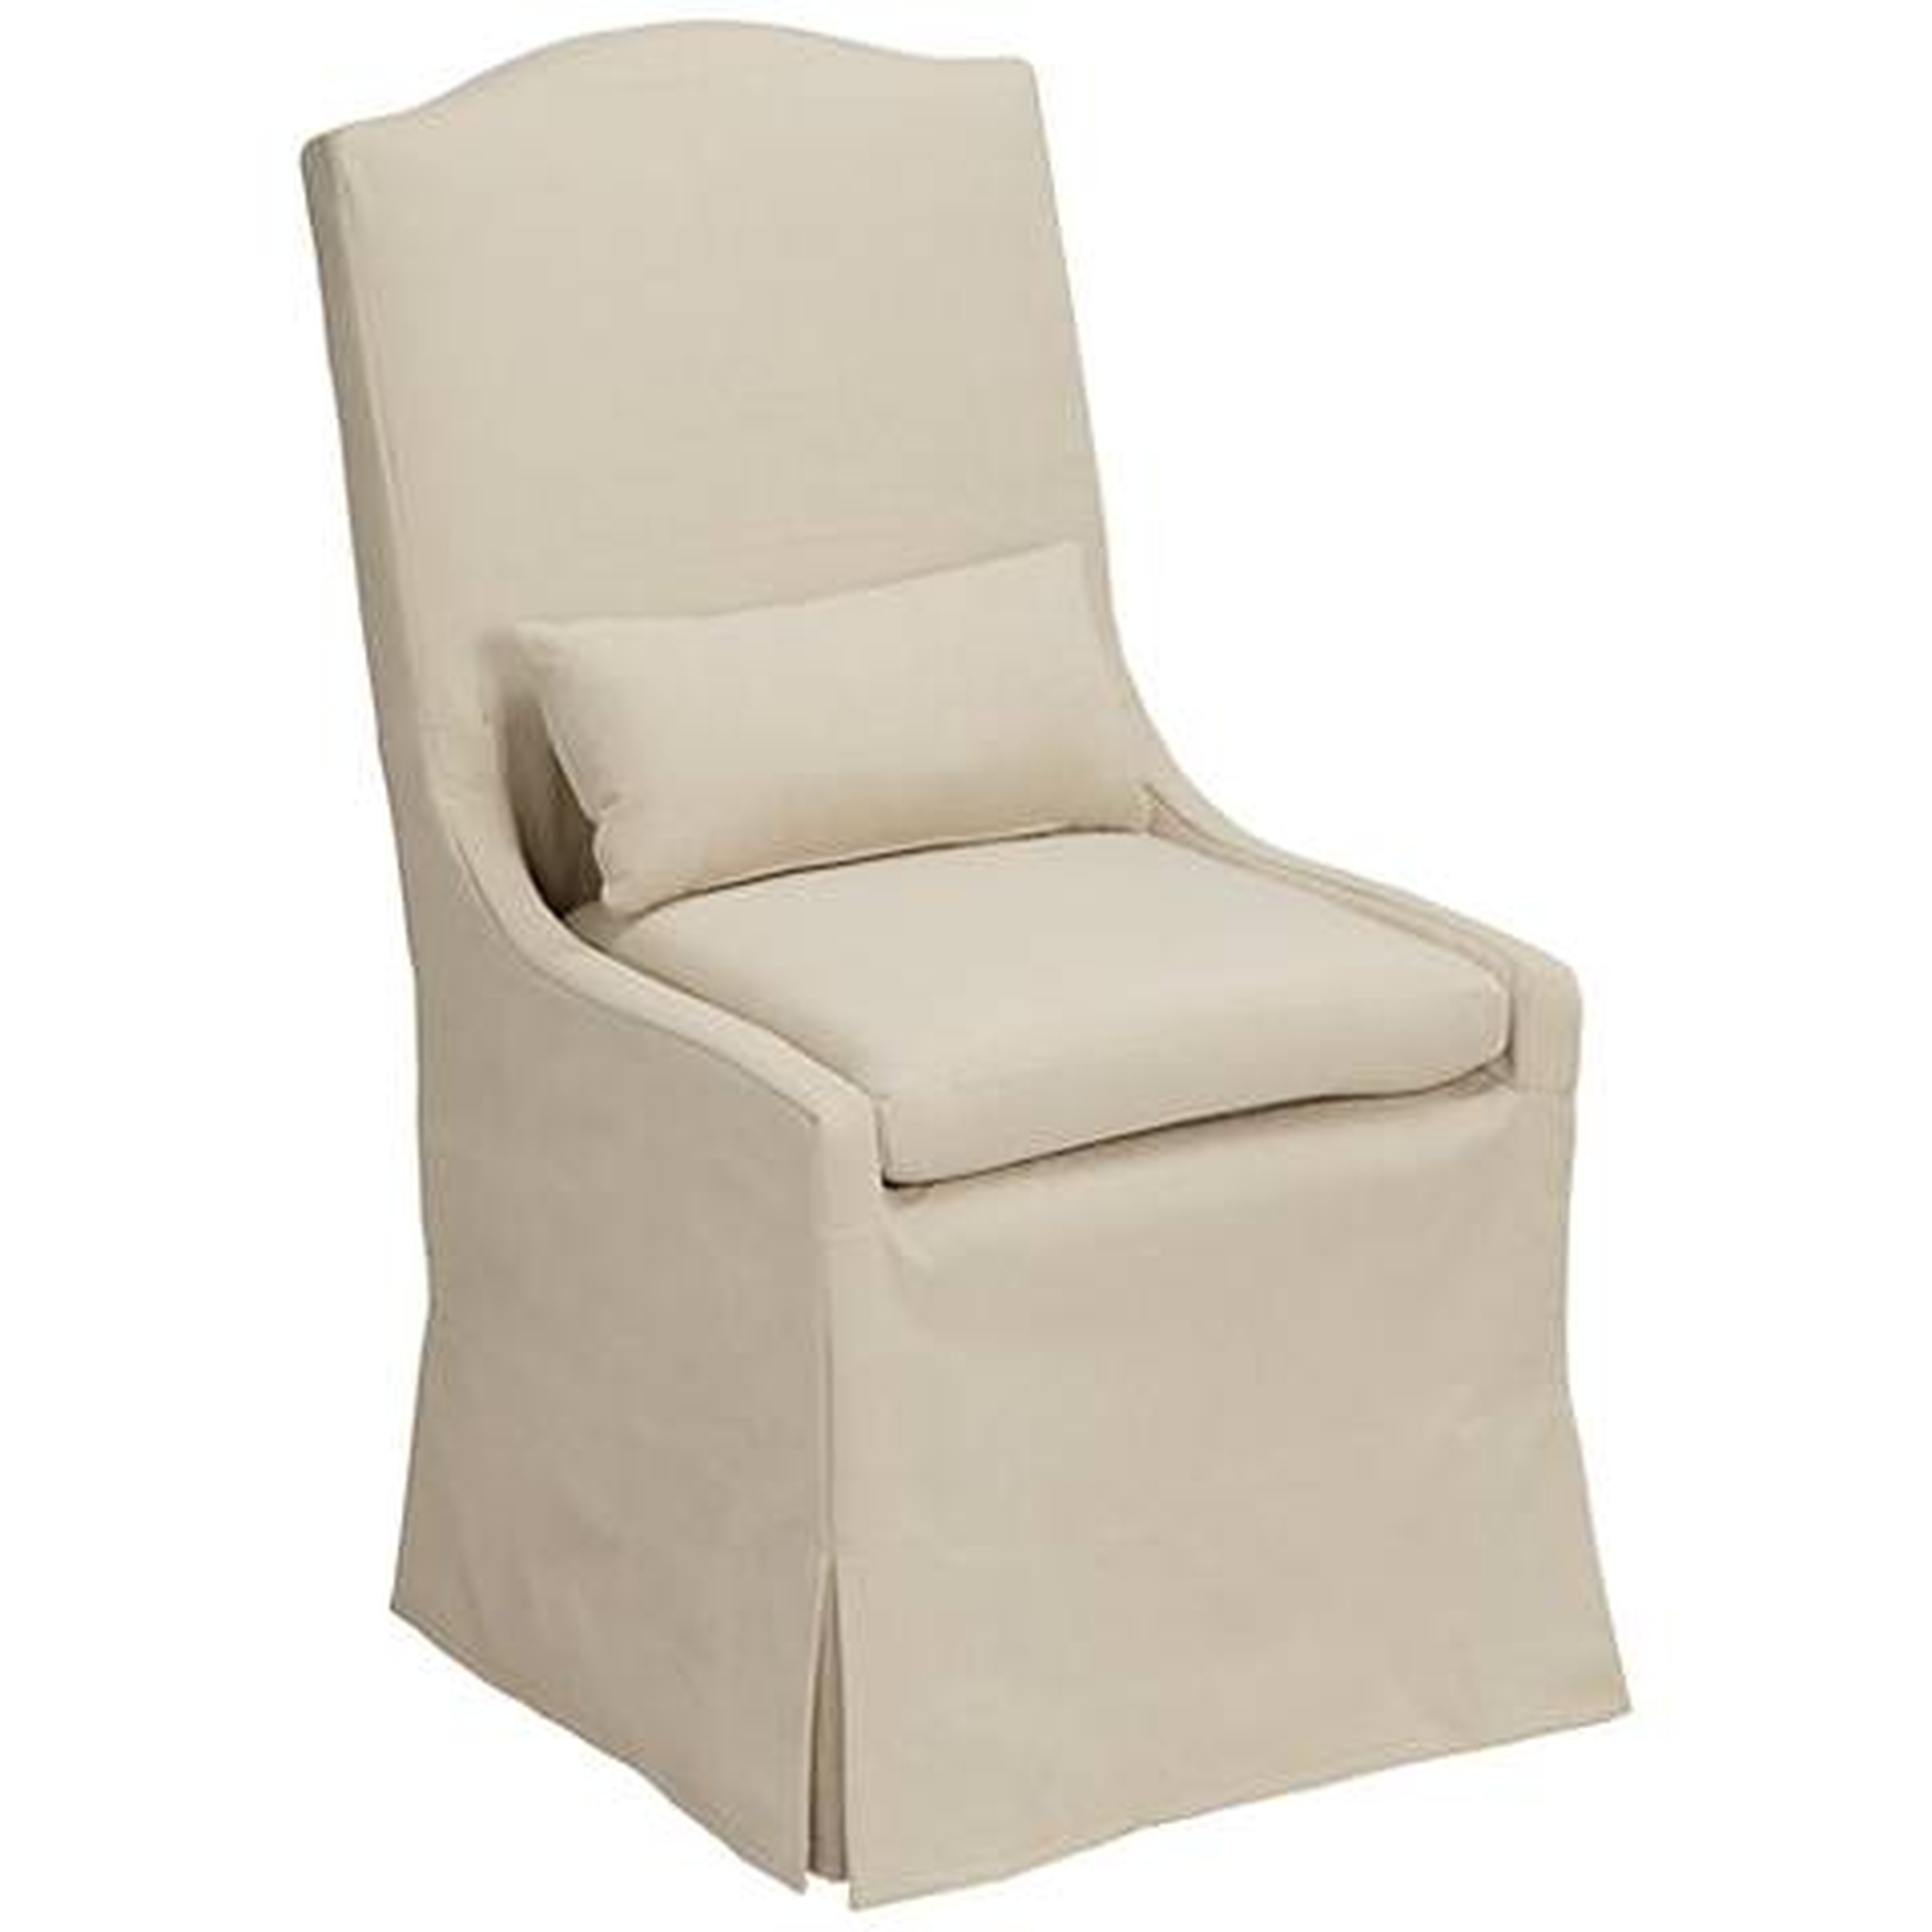 Hamlet Pebble Slipcover Dining Chair - Lamps Plus